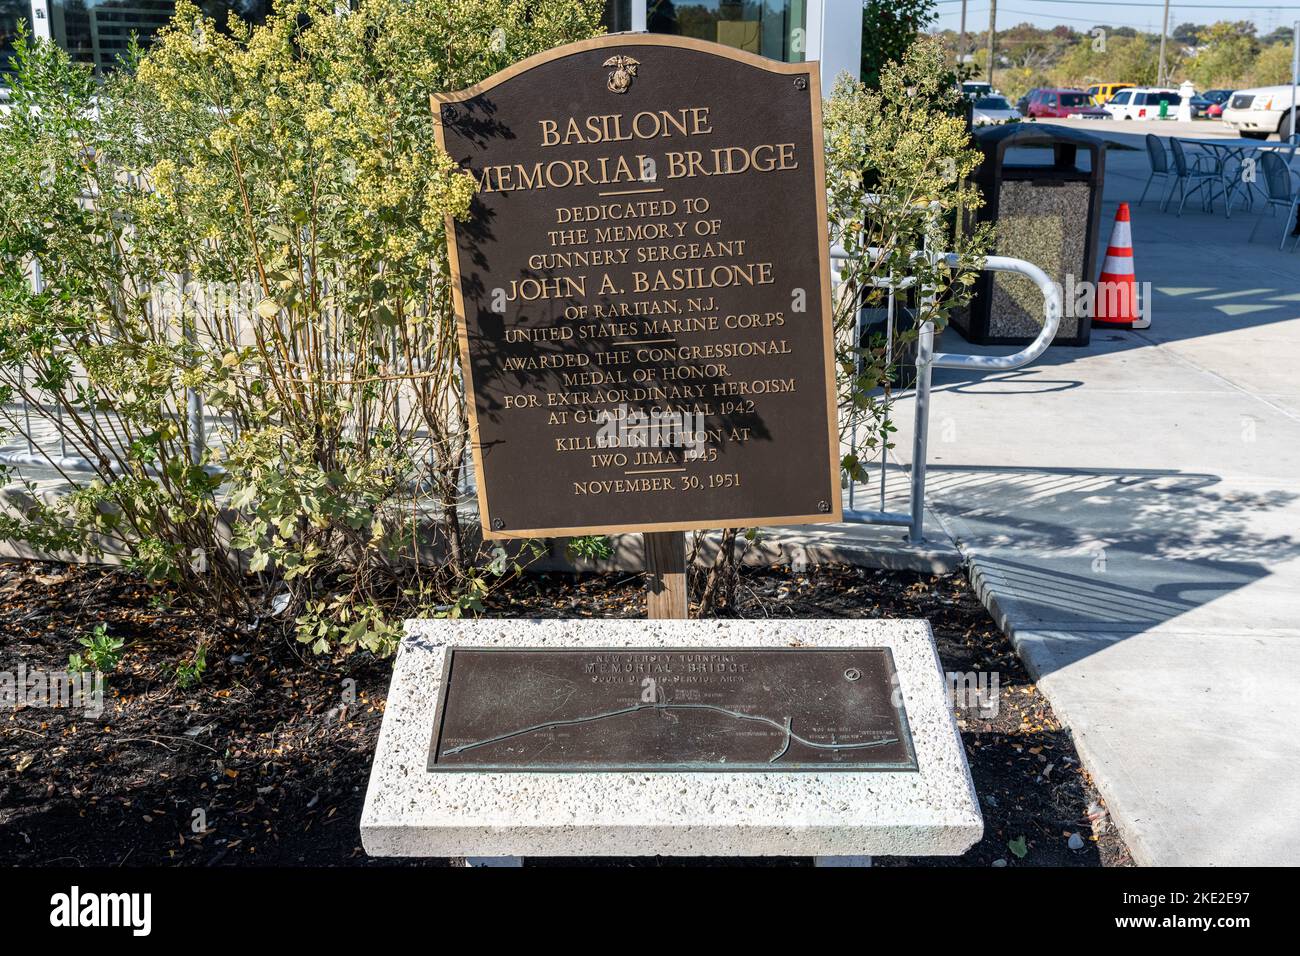 Woodbridge, NJ - Oct. 22, 2022: Plaque and sign about the Basilone Memorial Bridge on the New Jersey Turnpike is at the Thomas Edison Service Area. Stock Photo